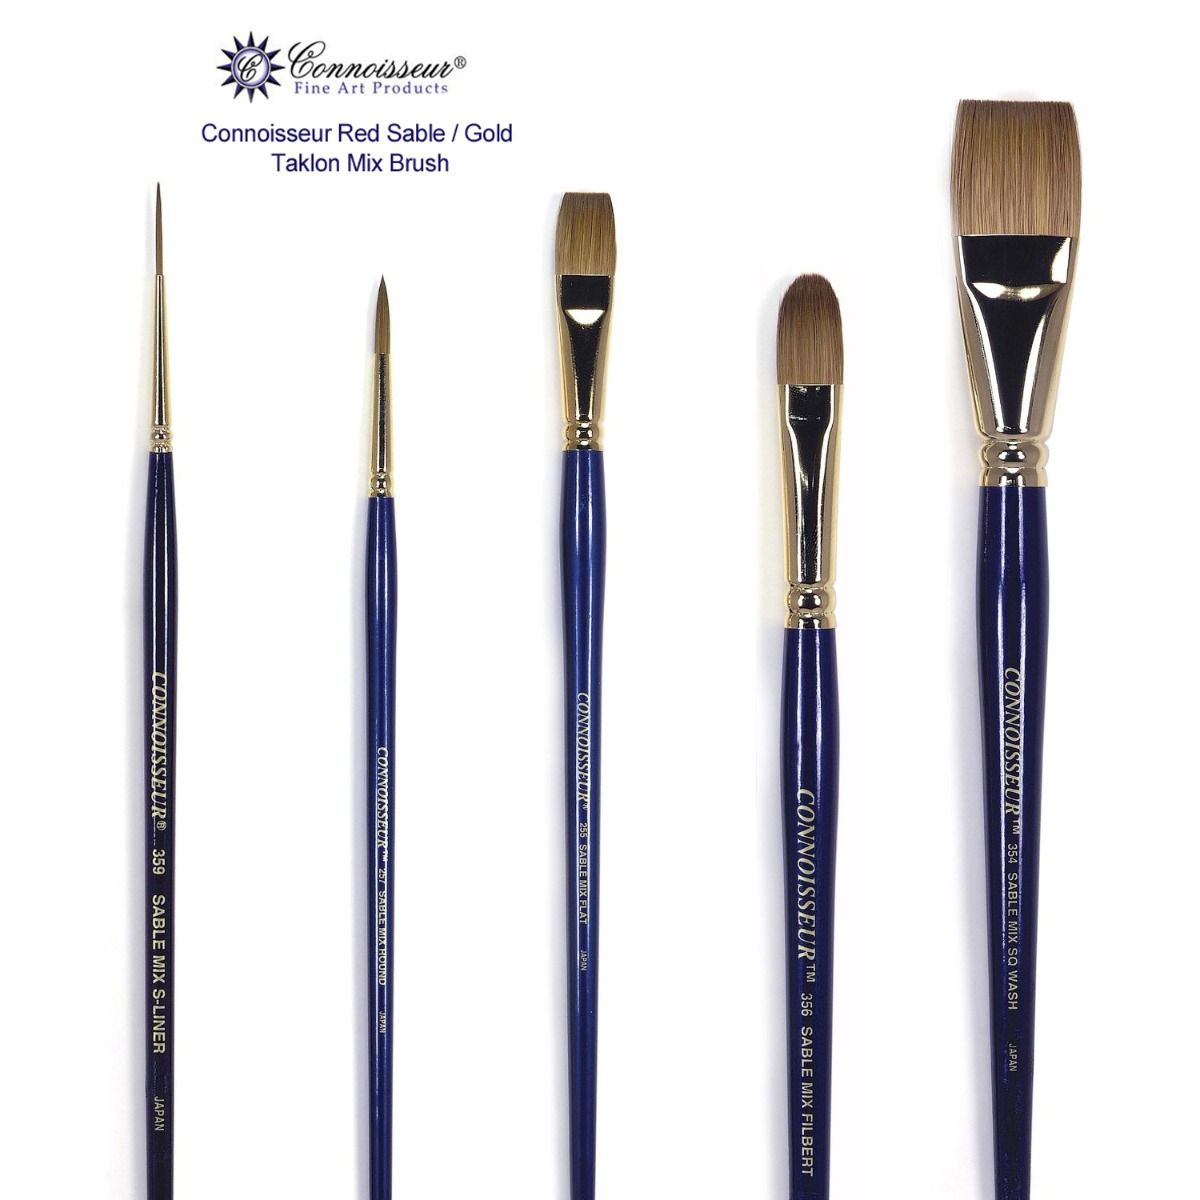 Connoisseur Red Sable/Gold Taklon Mix Brushes